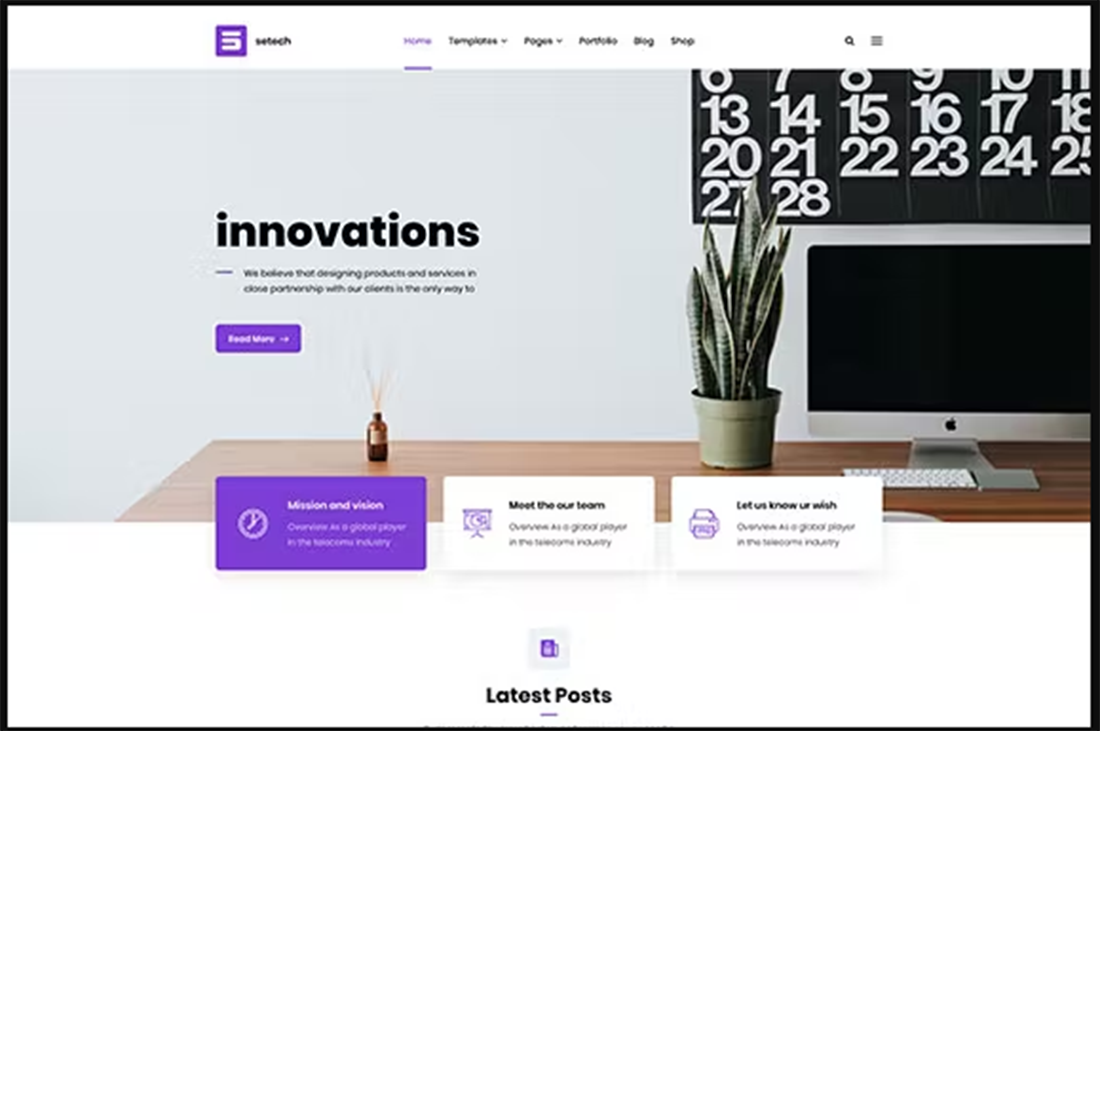 Free IT Services and Solutions HTML Template cover image.